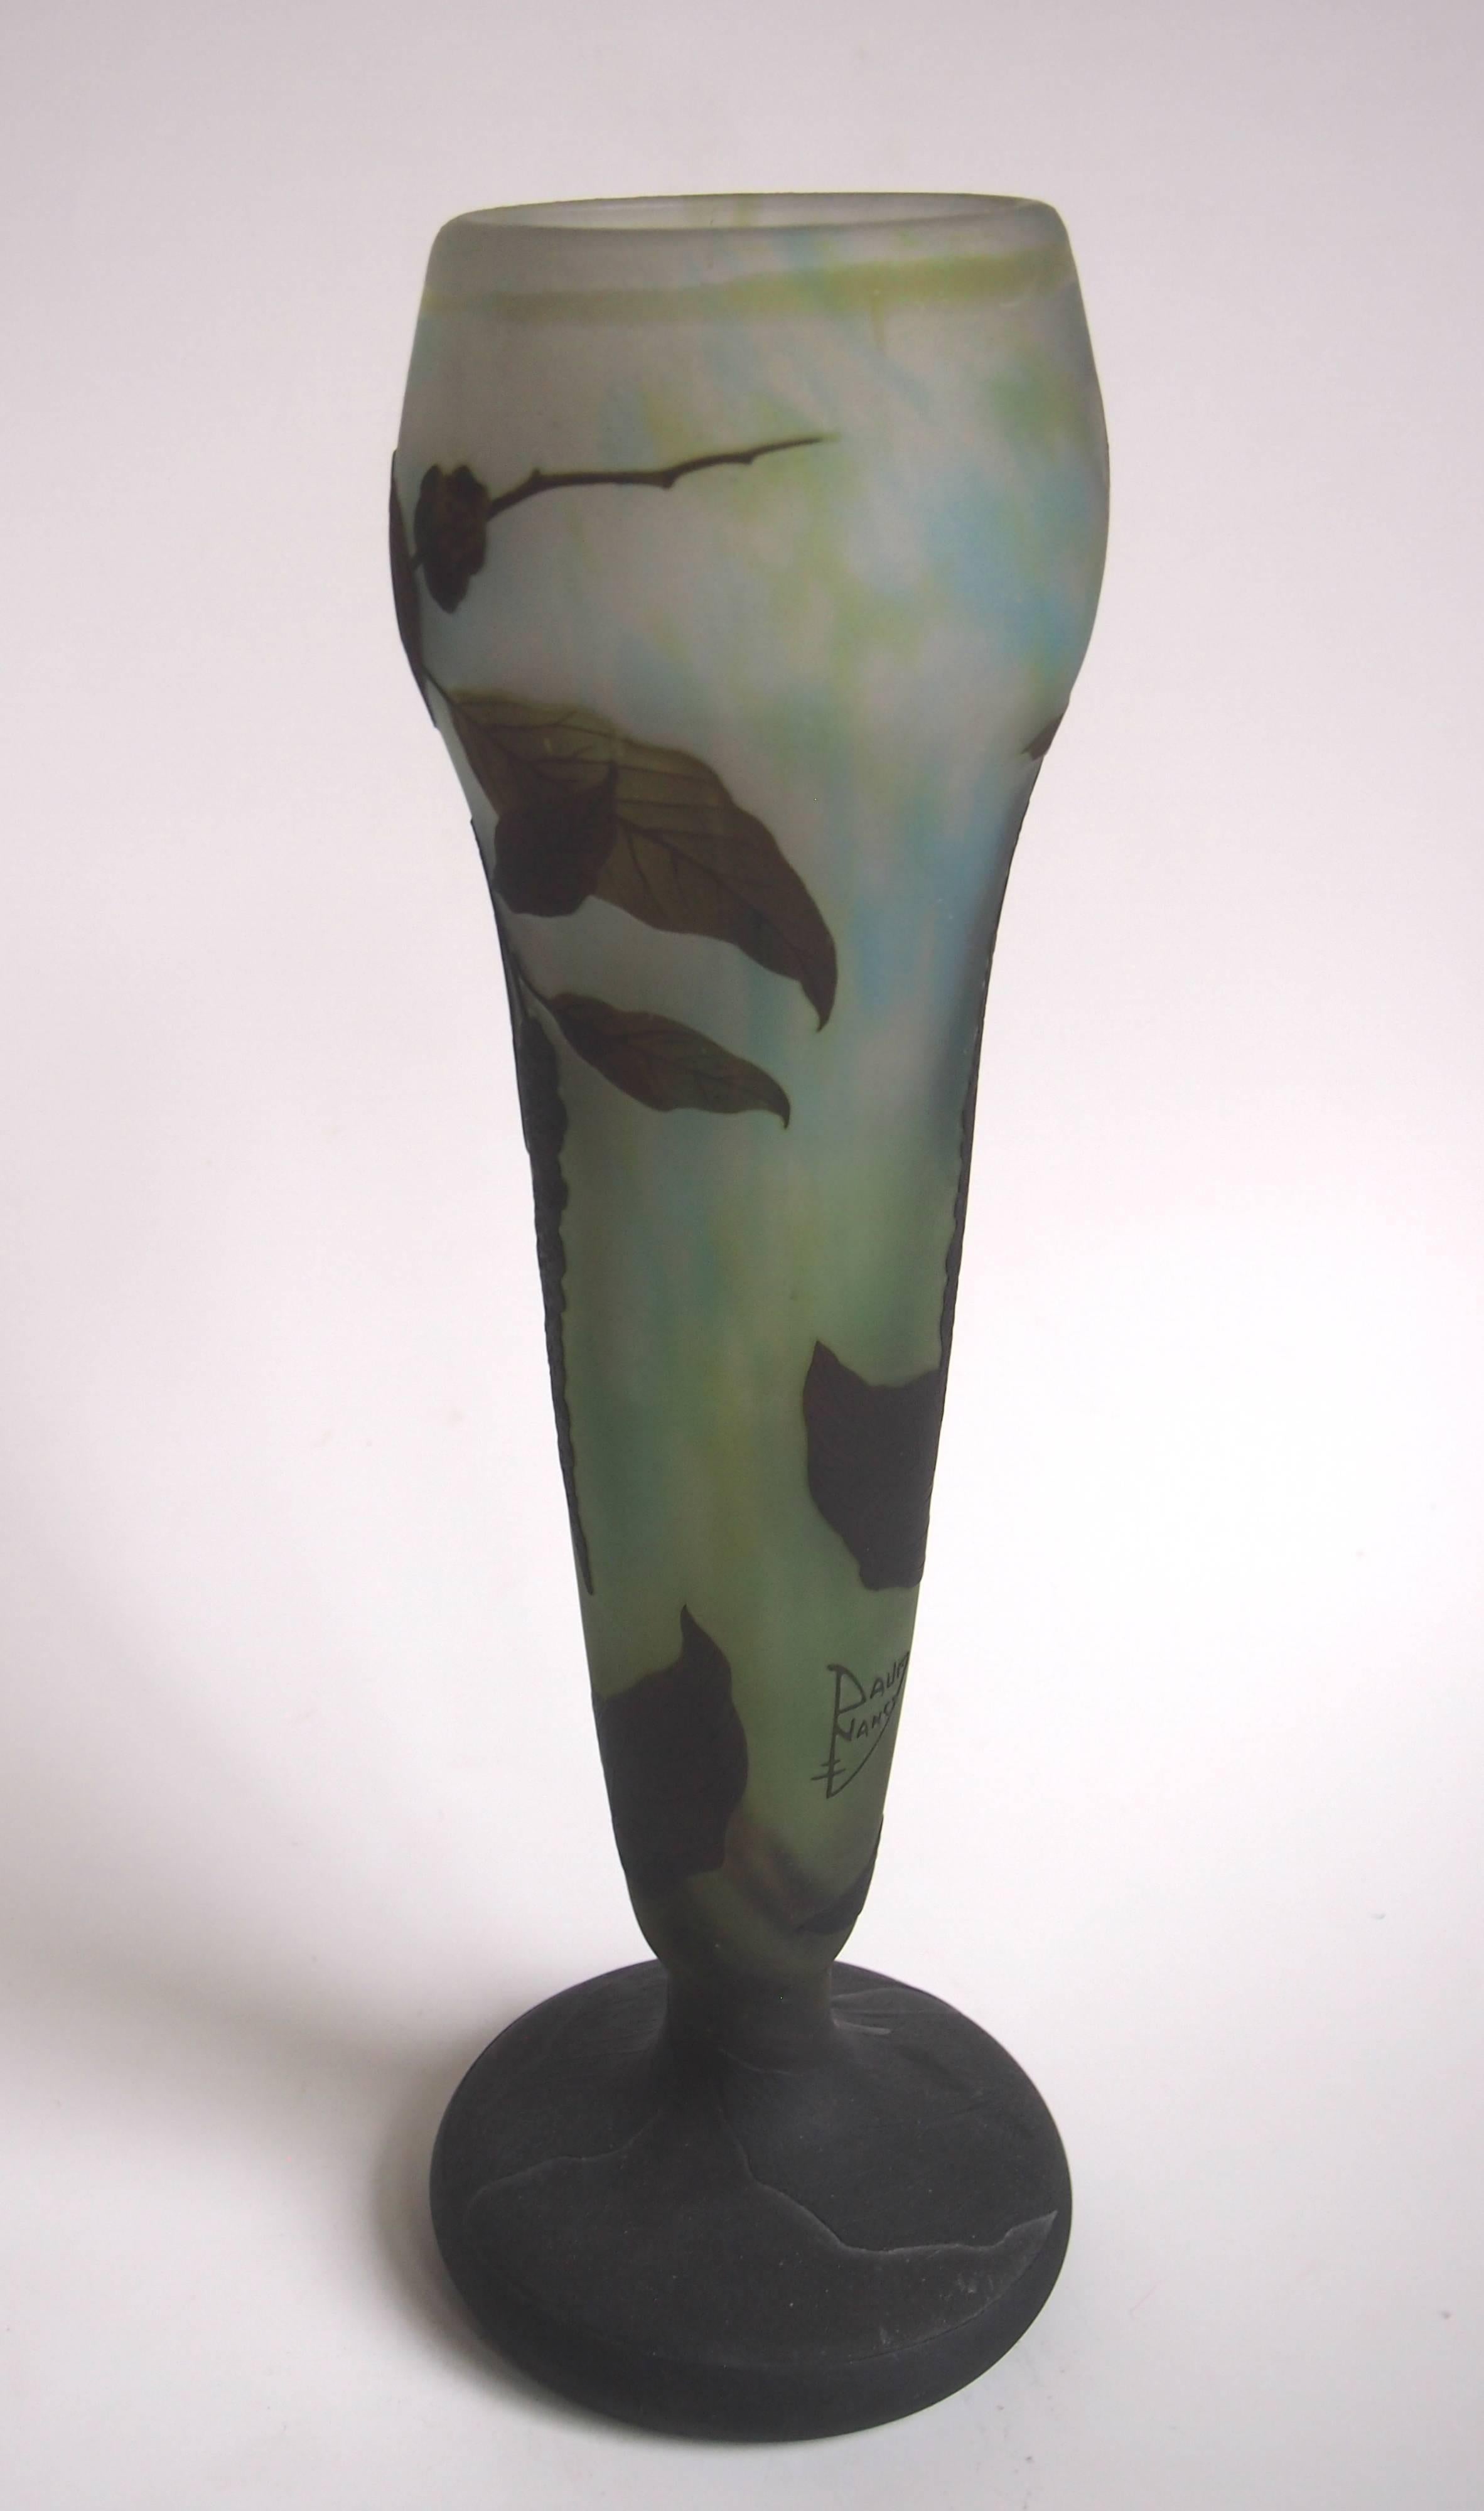 Dramatic Daum Nancy Cameo vase, depicting a large trailing seed pod plant in blues, greens and brown/black with very detail carved black foot (see image 6). Signed (image 2).

Daum (along with Galle) was one of the two greatest glass works of France